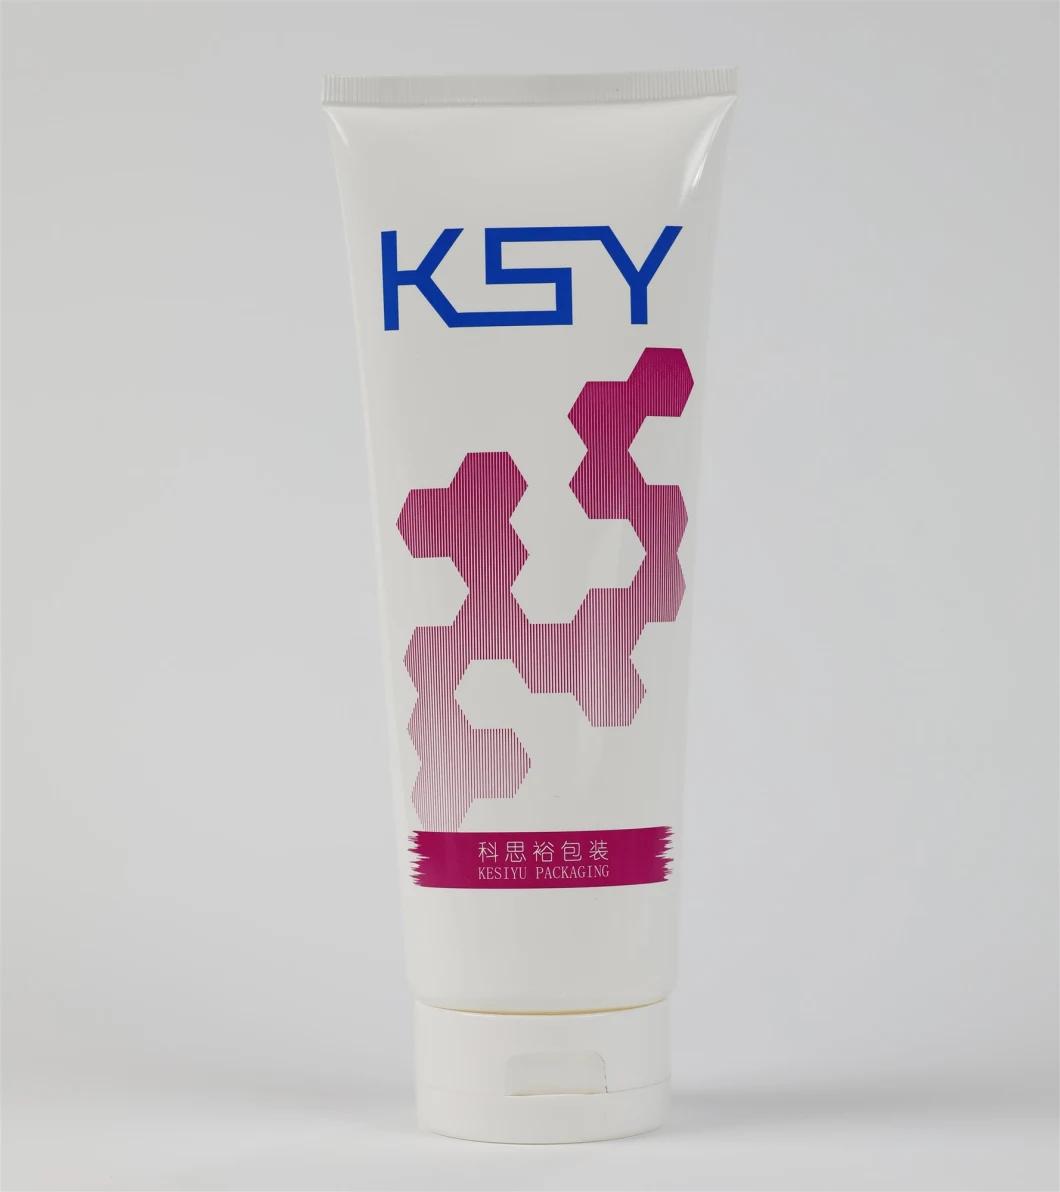 300ml Hand Cream Tube Cosmetic Tube Bb Cream with Customized Cap Packaging Materials